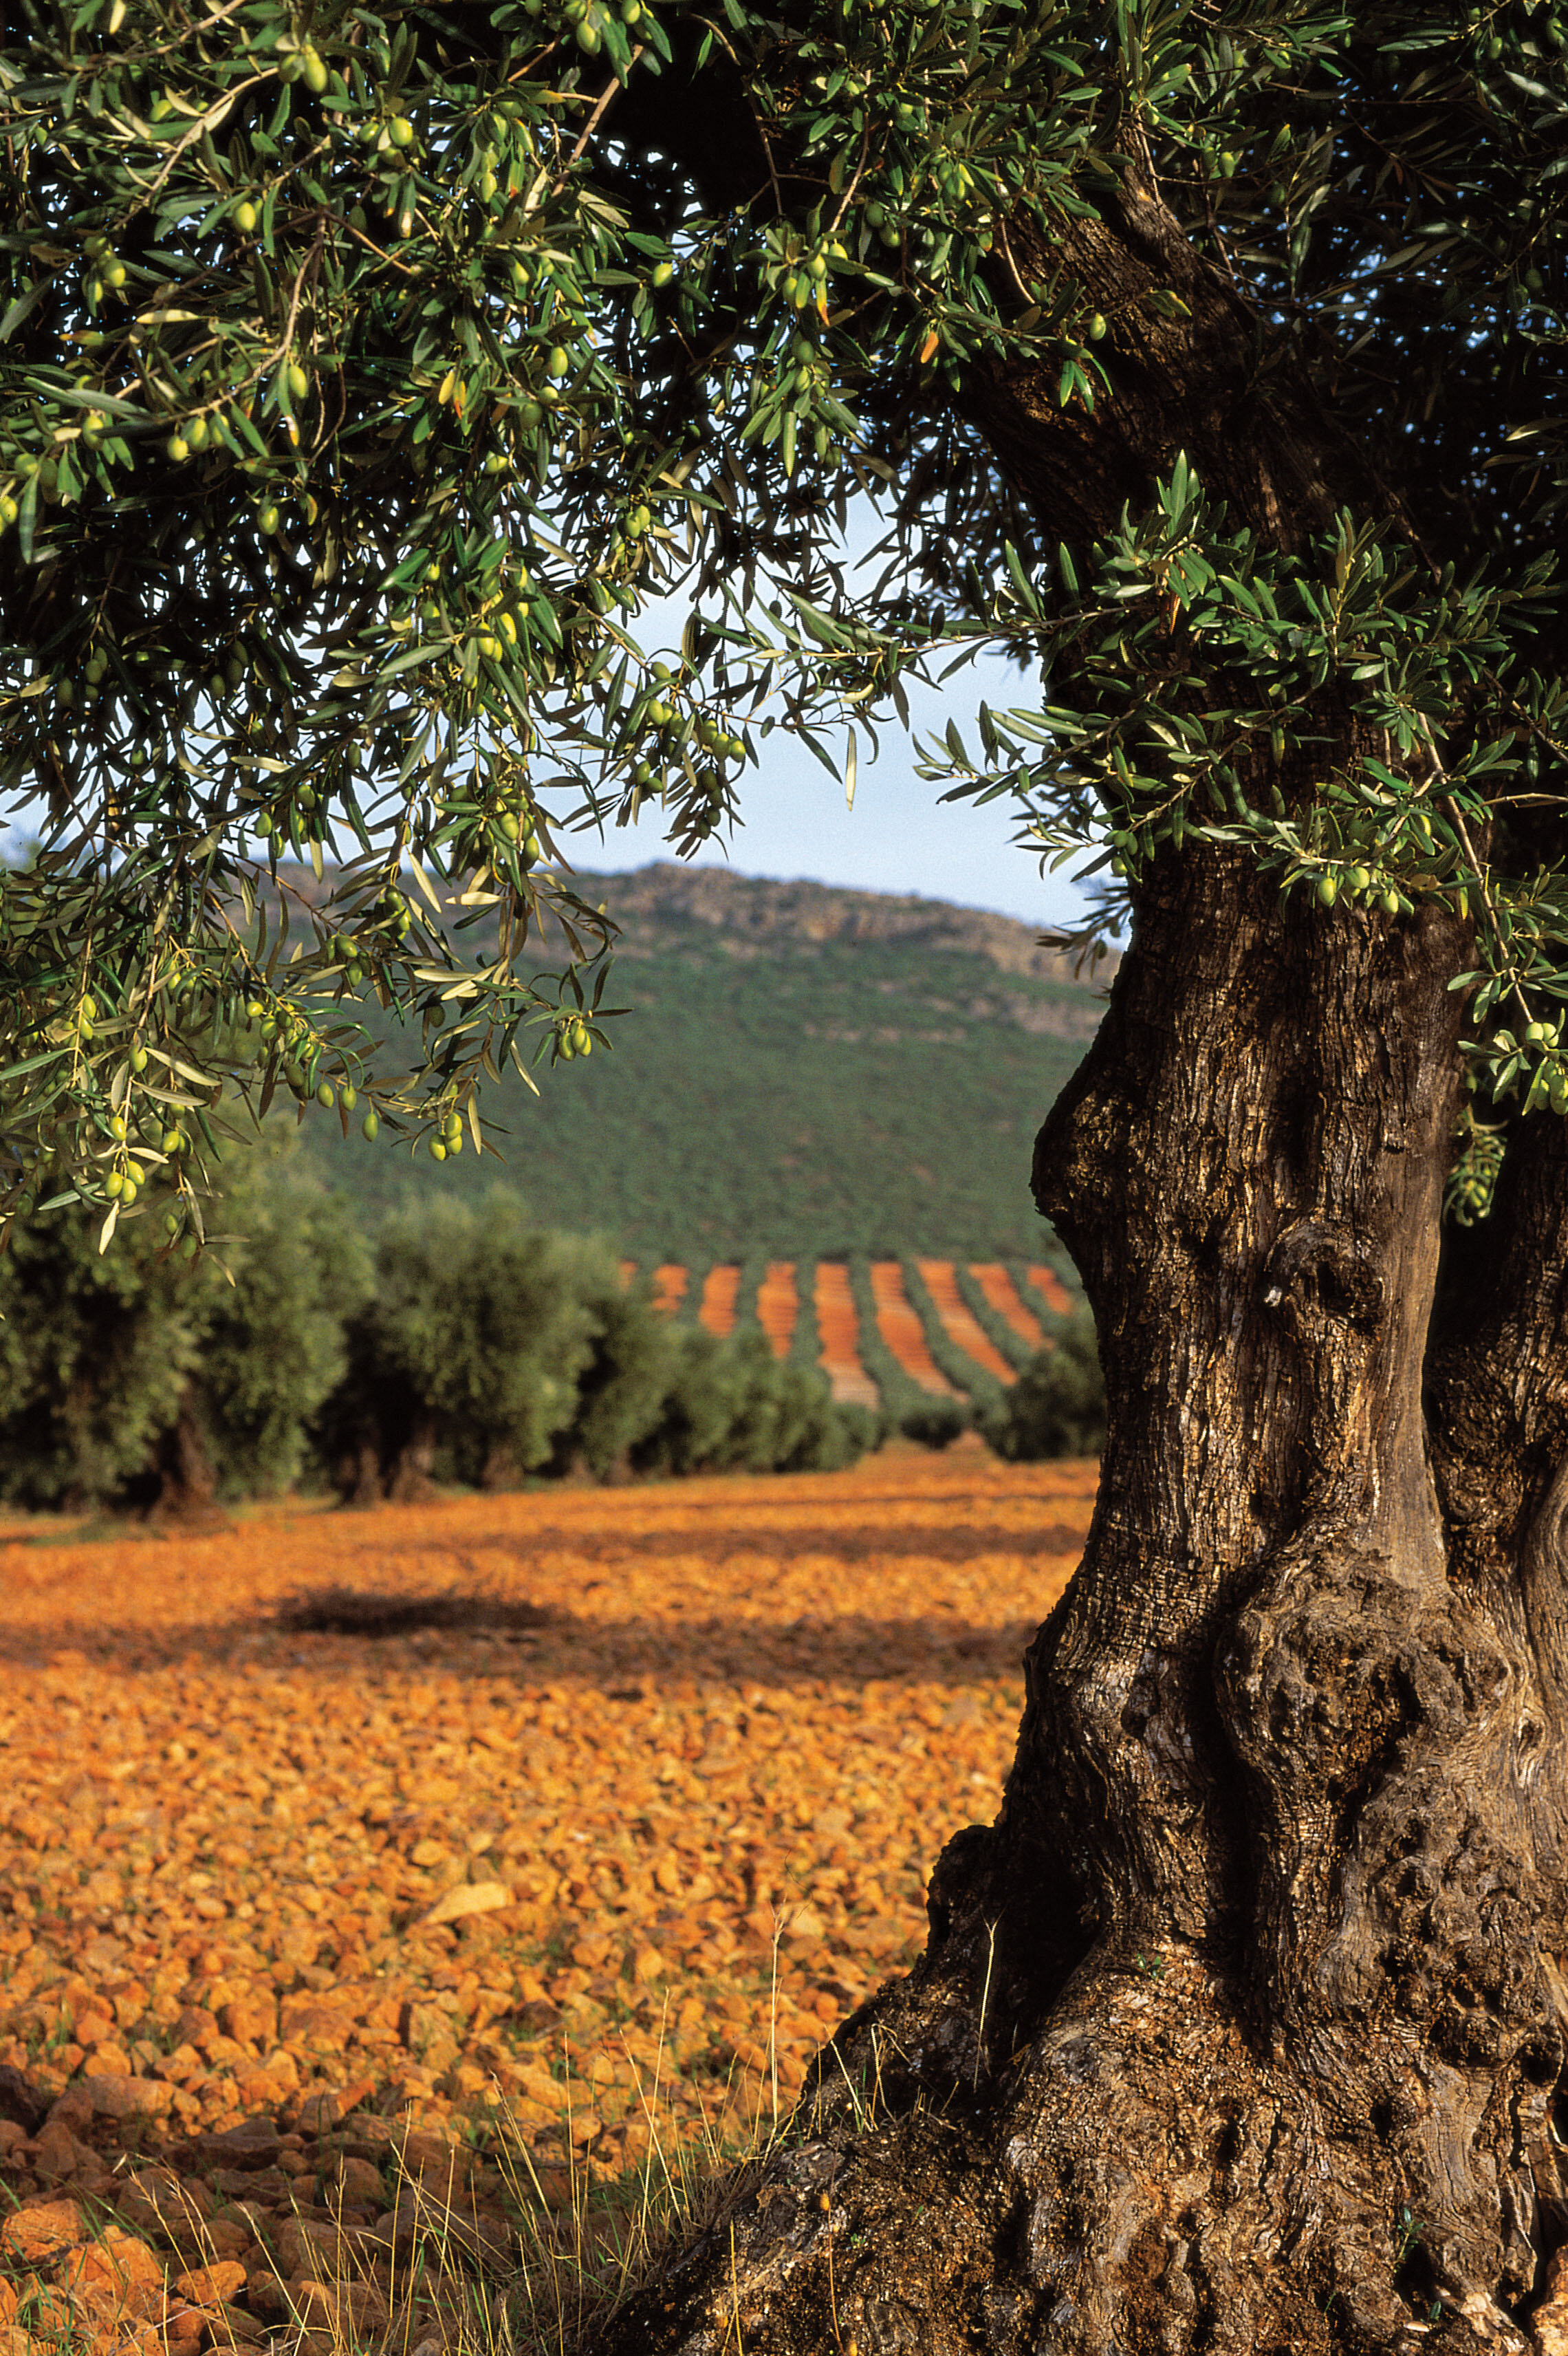 Learn about Olive Oil and Sustainability